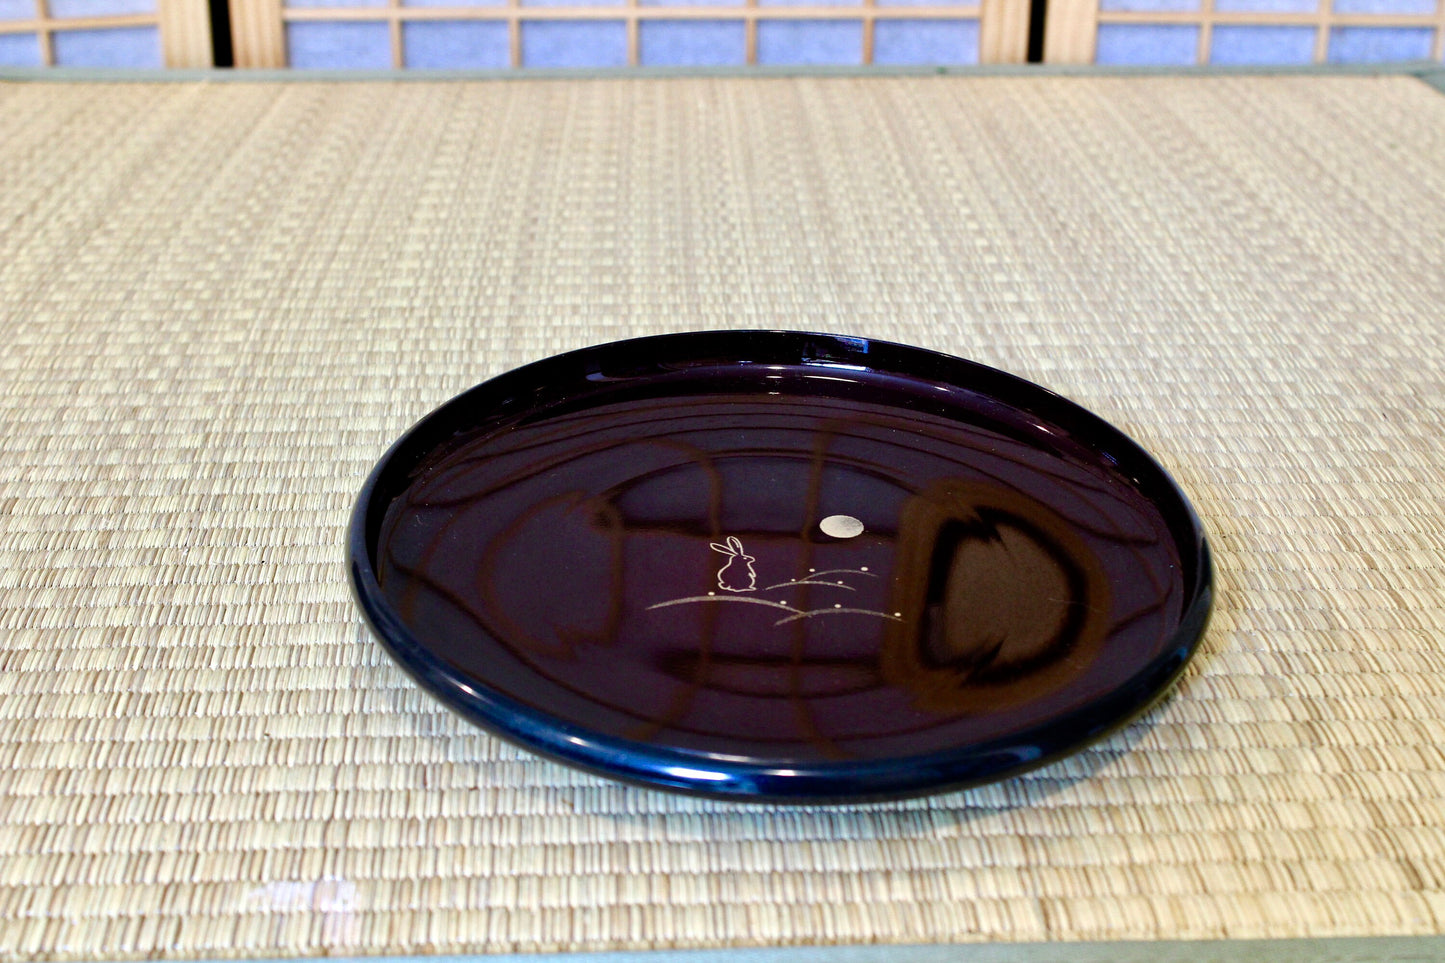 Round light weight, obon type plastic saucer for large Kokedama. 8" x 8"